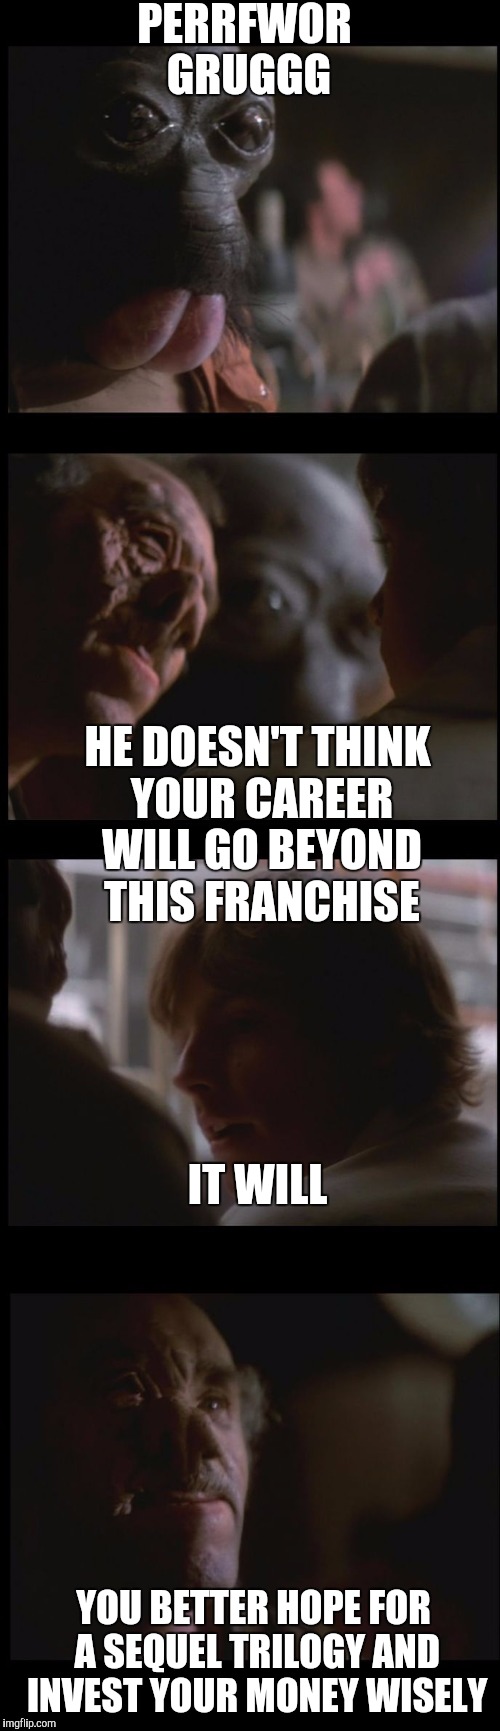 He Doesn't Like You Alternative | PERRFWOR GRUGGG; HE DOESN'T THINK YOUR CAREER WILL GO BEYOND THIS FRANCHISE; IT WILL; YOU BETTER HOPE FOR A SEQUEL TRILOGY AND INVEST YOUR MONEY WISELY | image tagged in he doesn't like you alternative,memes,star wars | made w/ Imgflip meme maker